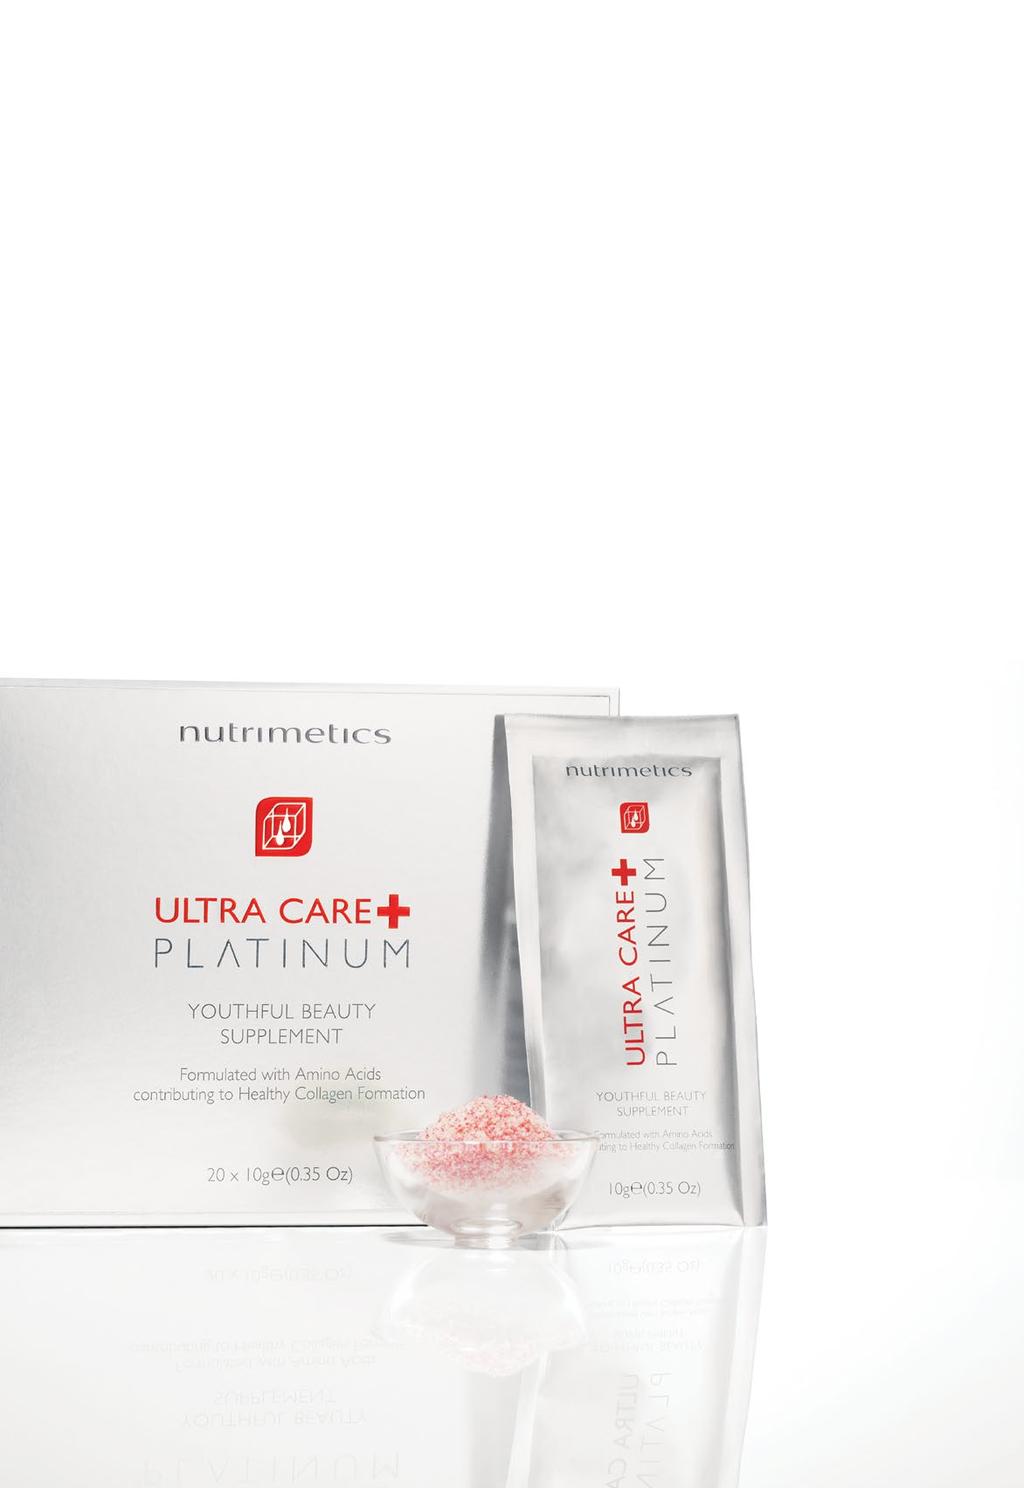 Exclusive Launch Offer Total Platinum Transformation Our Platinum Total Transformation Collection is an investment in the future of your skin at any age.